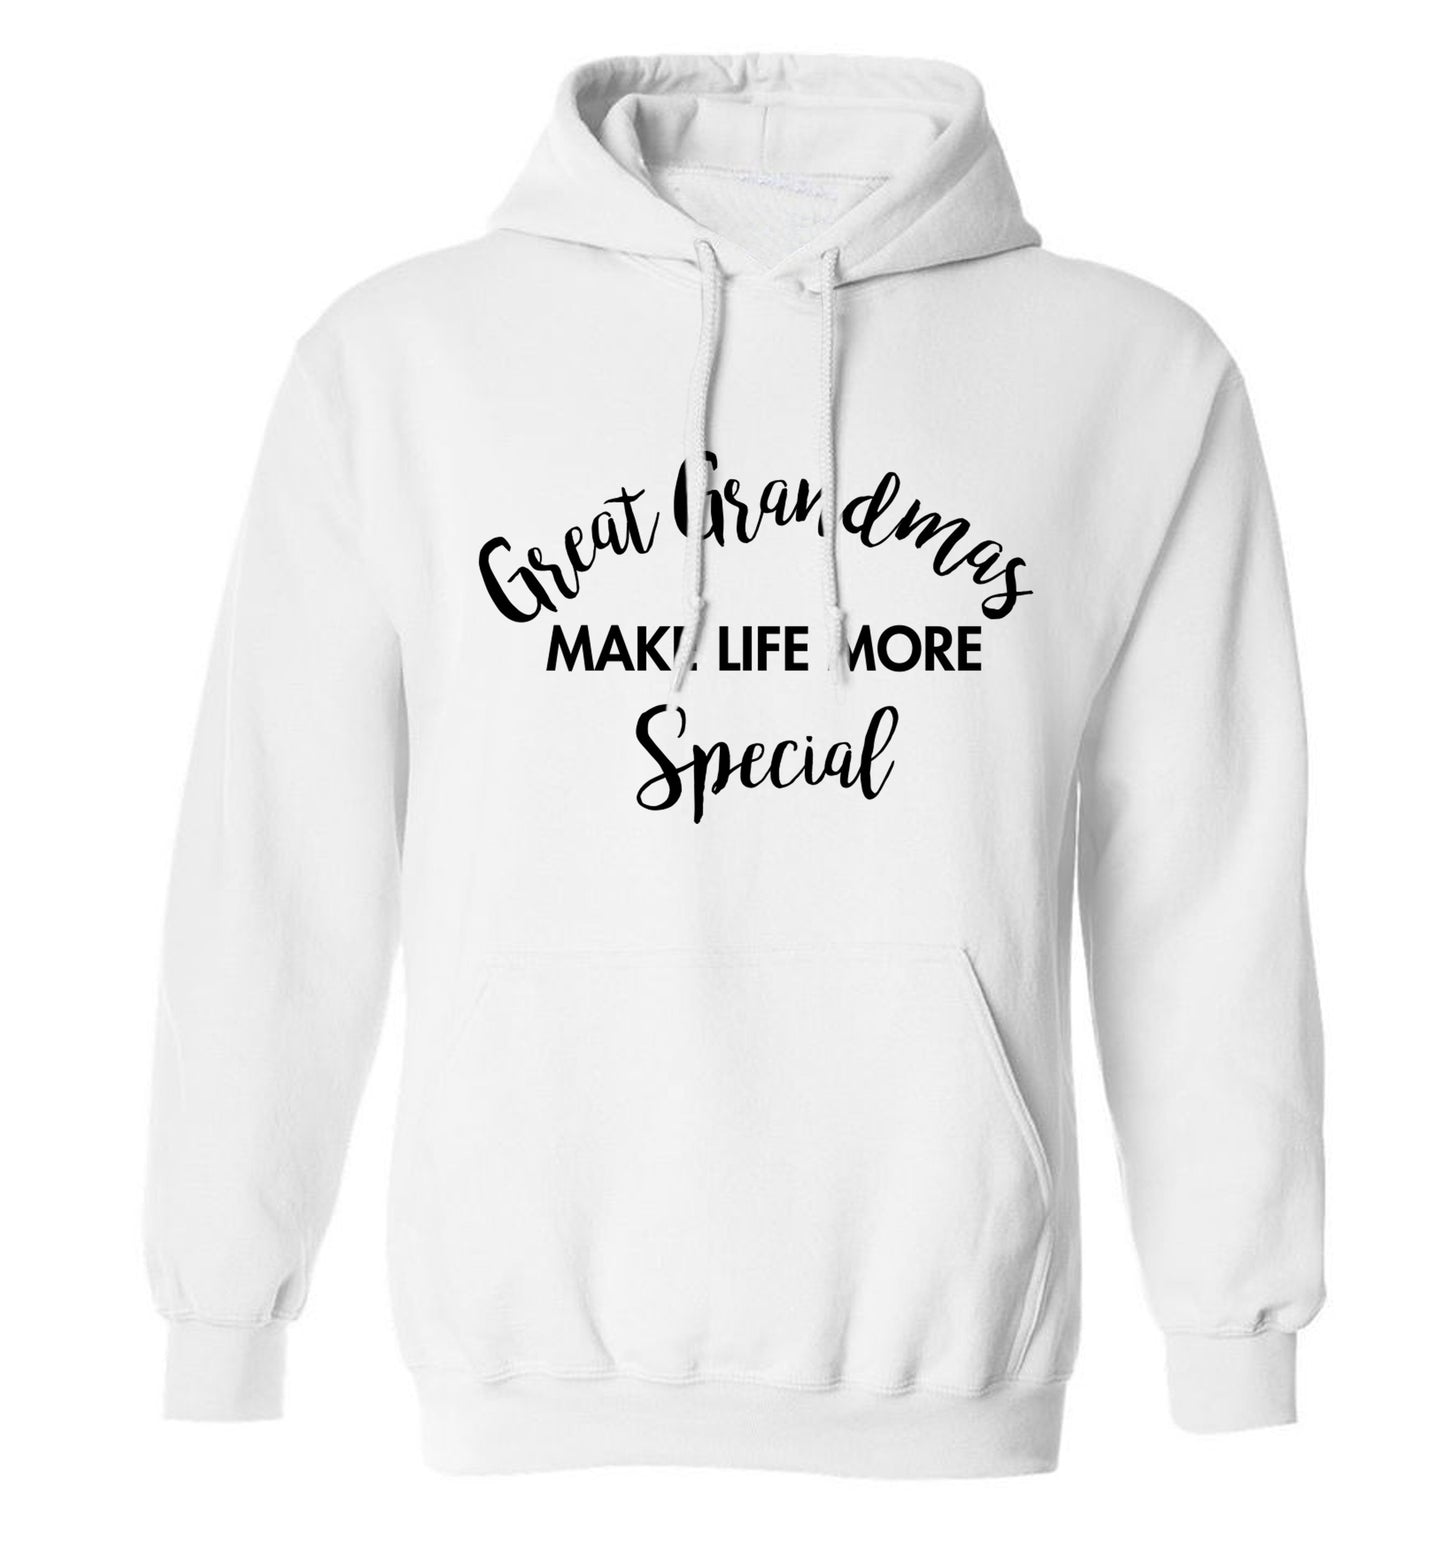 Great Grandmas make life more special adults unisex white hoodie 2XL